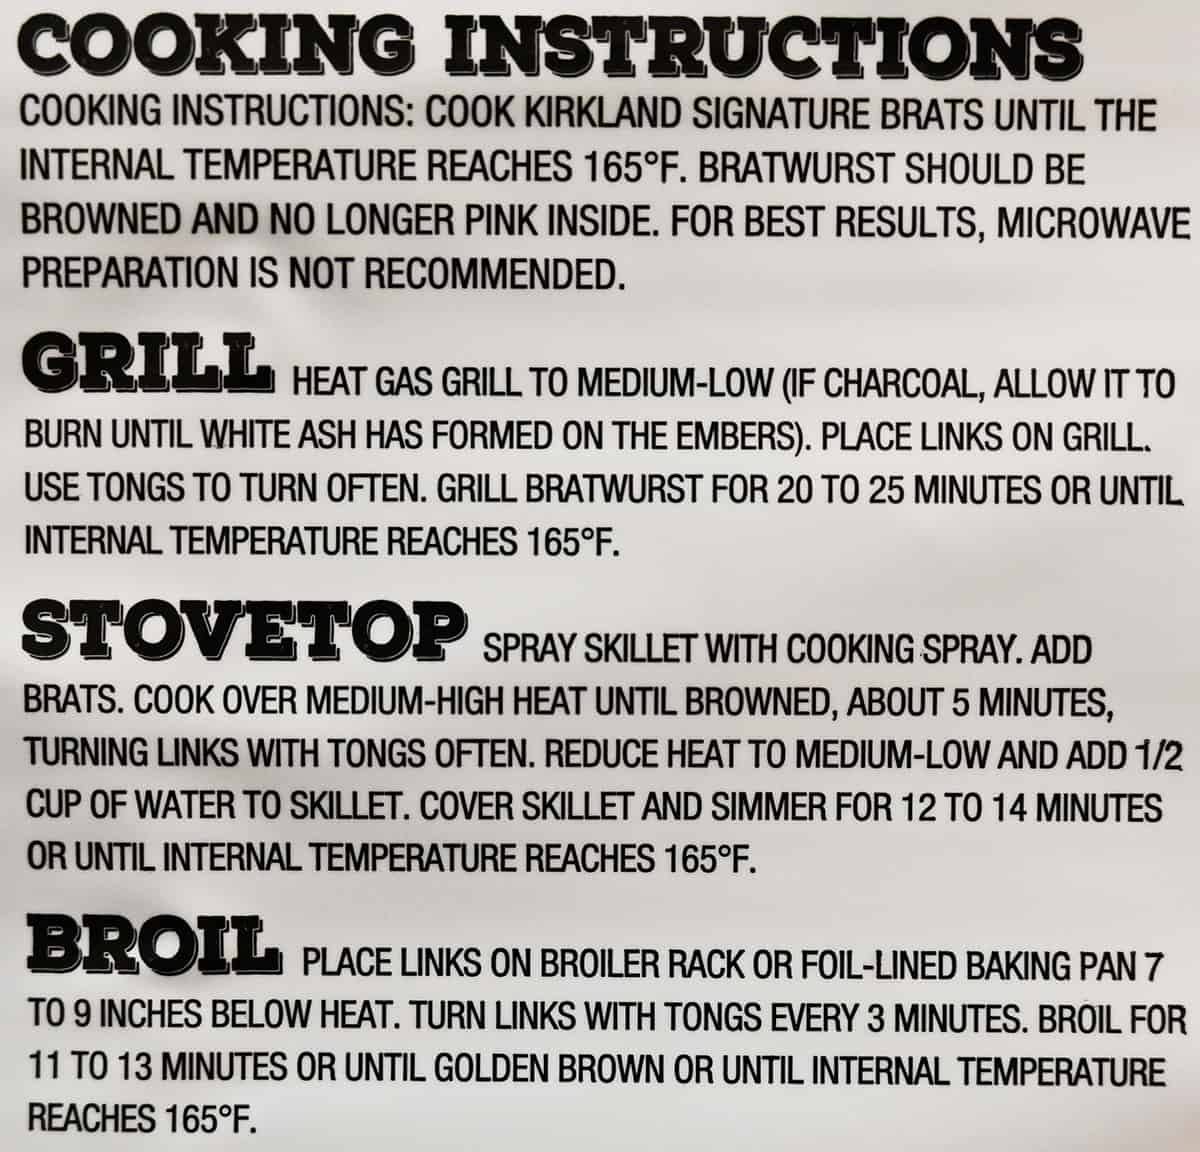 Image of the cooking instructions for the brats from the back of the package.